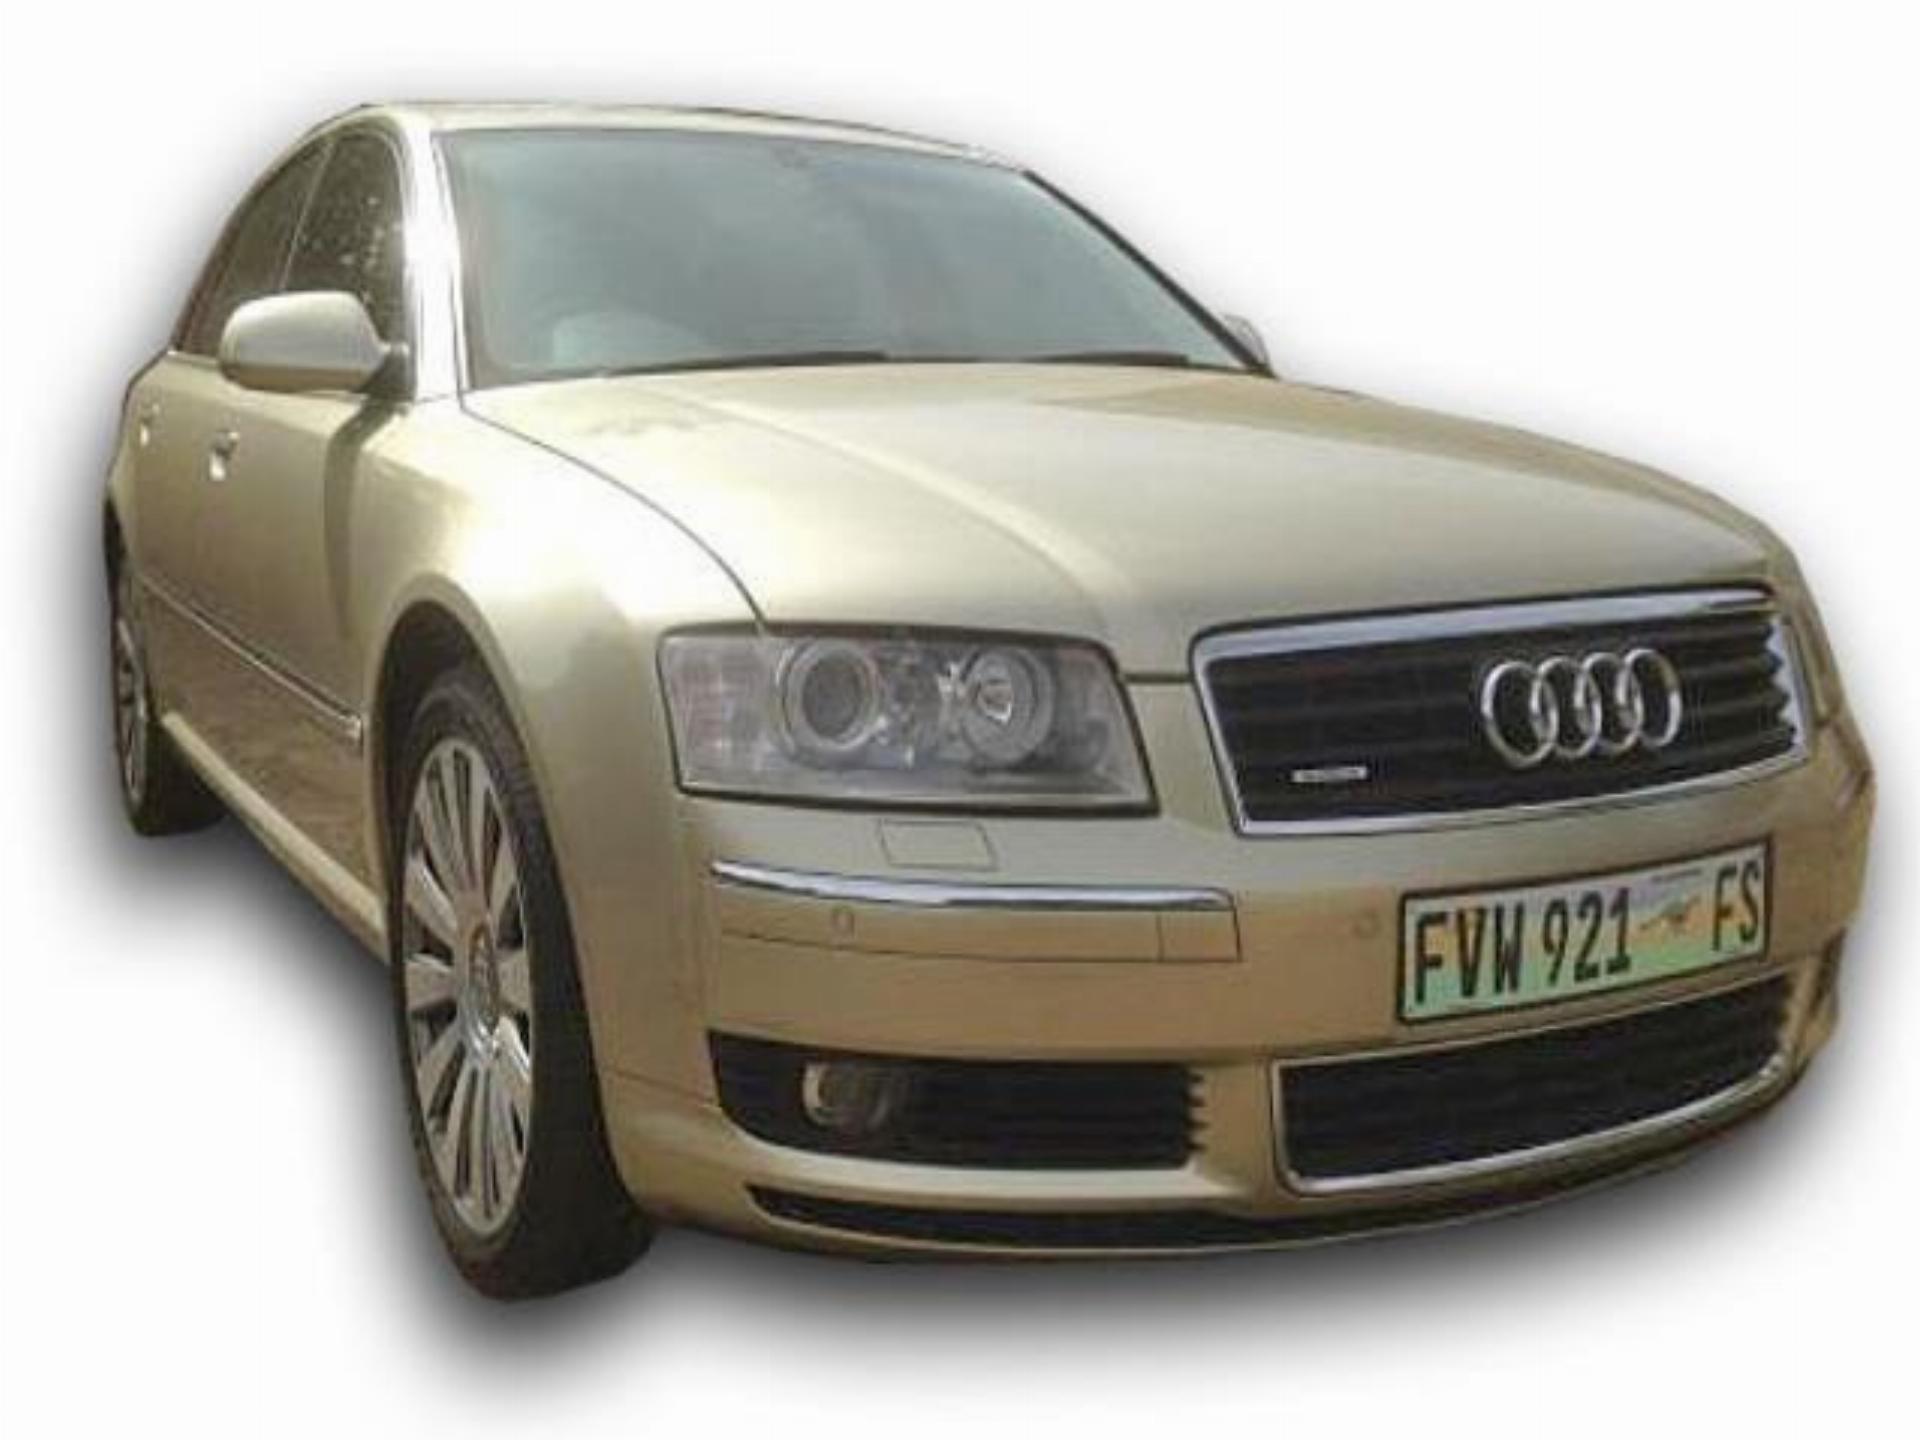 Used Audi A8 4.2 Quattro 2005 on auction - PV1019287